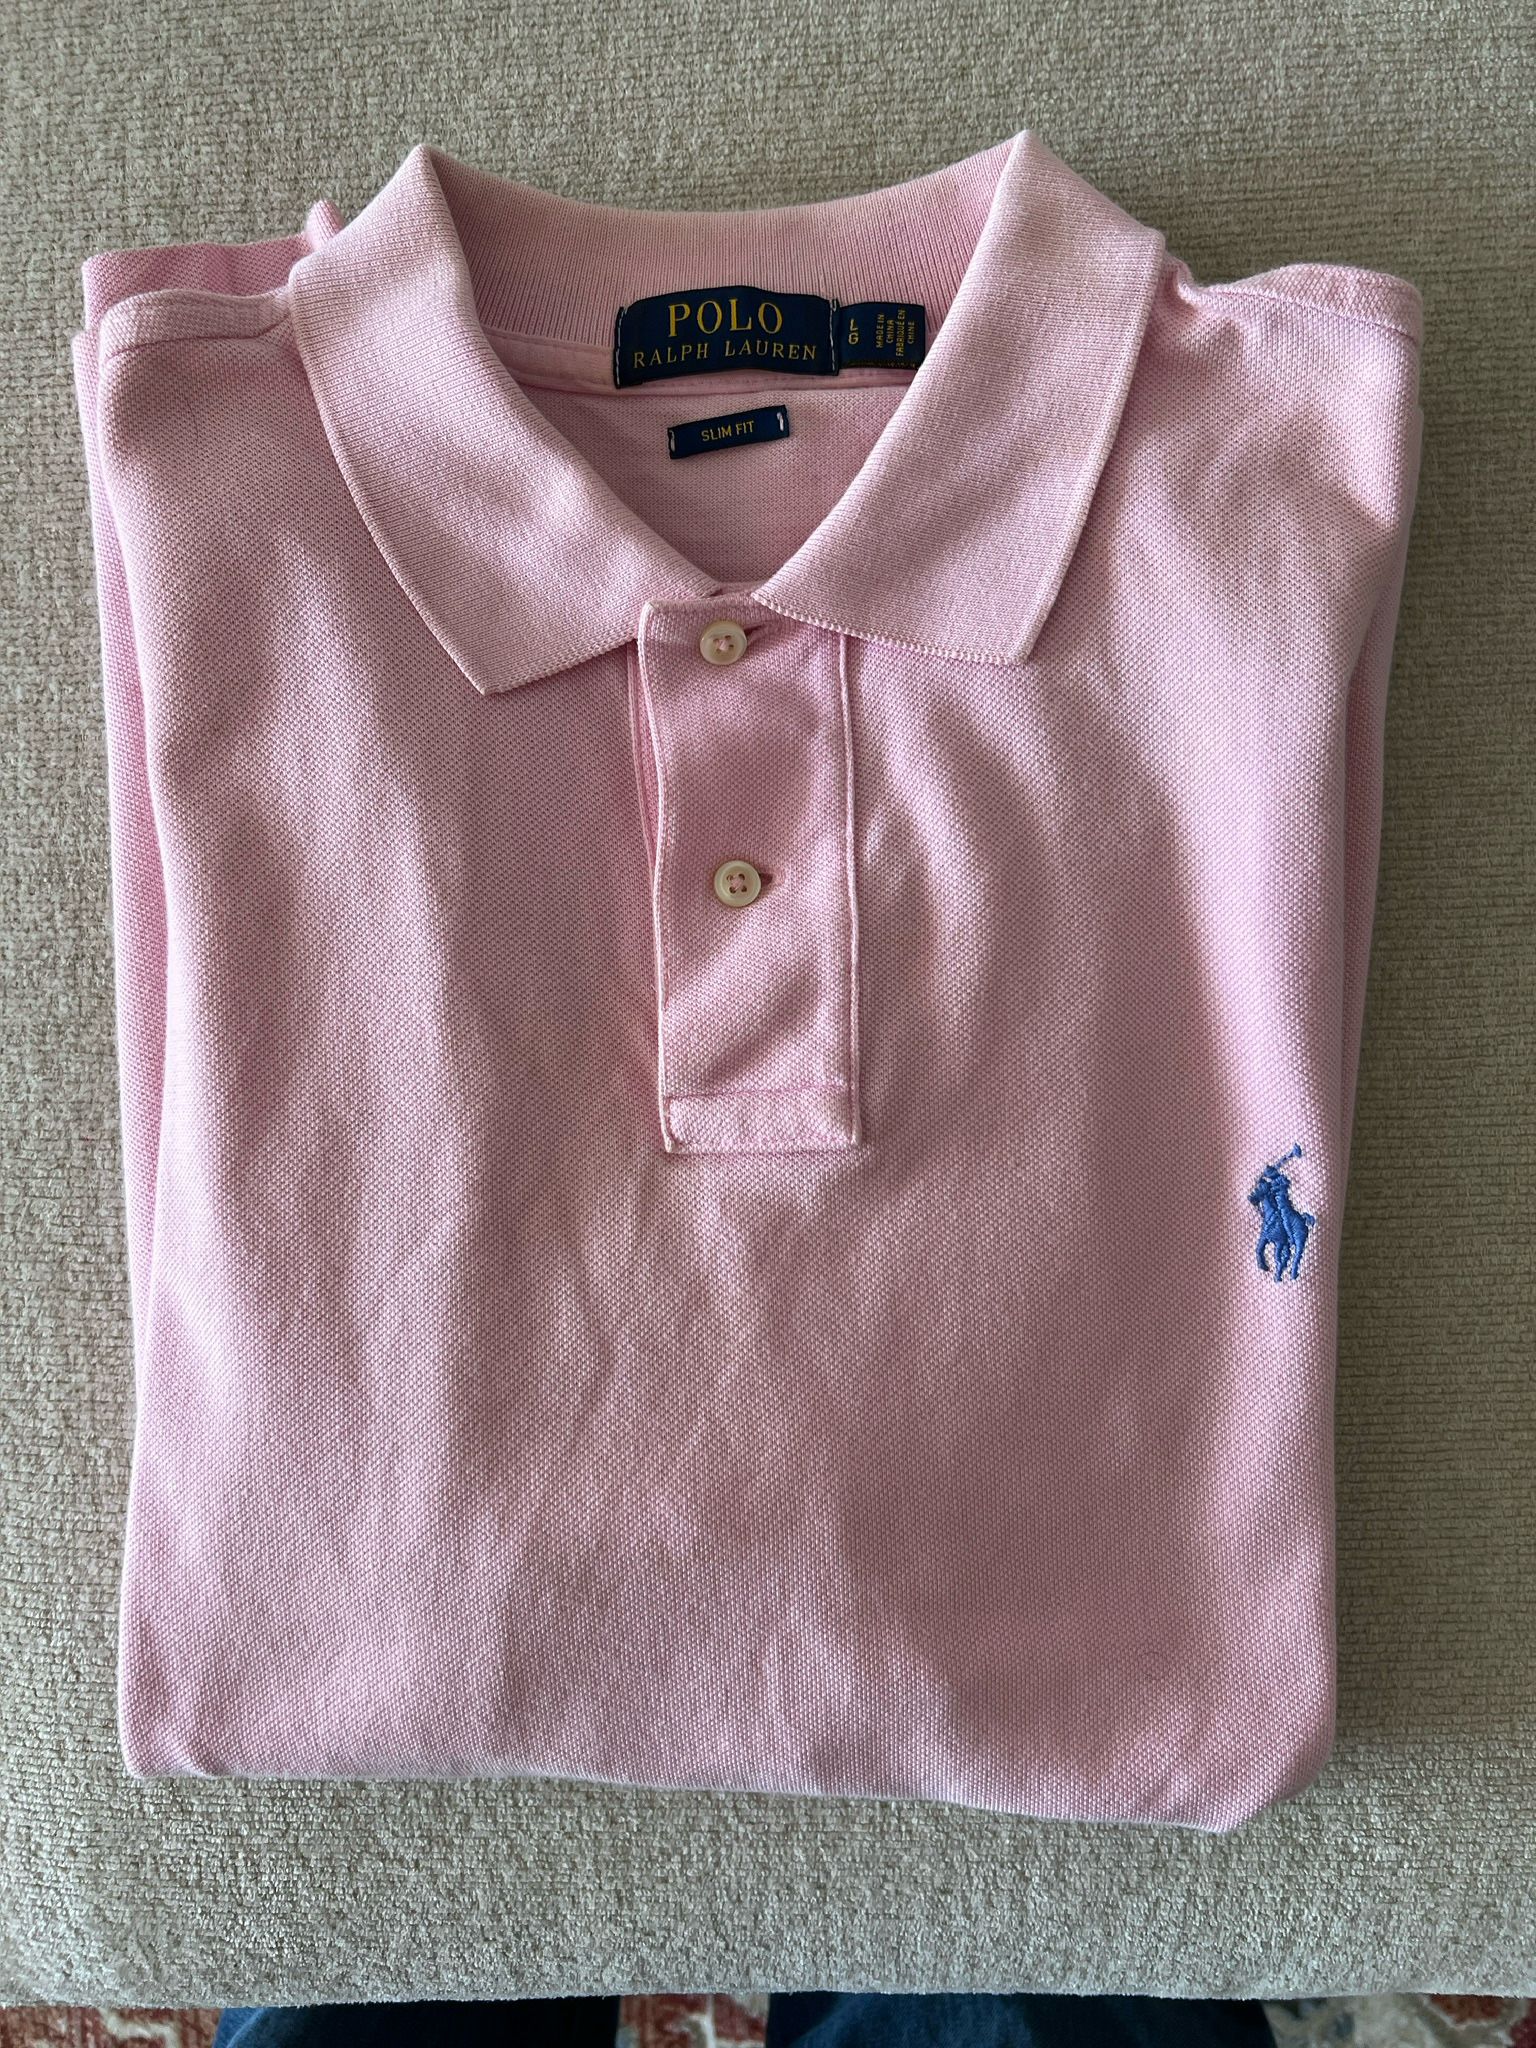 Polo Ralph Lauren Pink Polo Size Large Colared Shirt